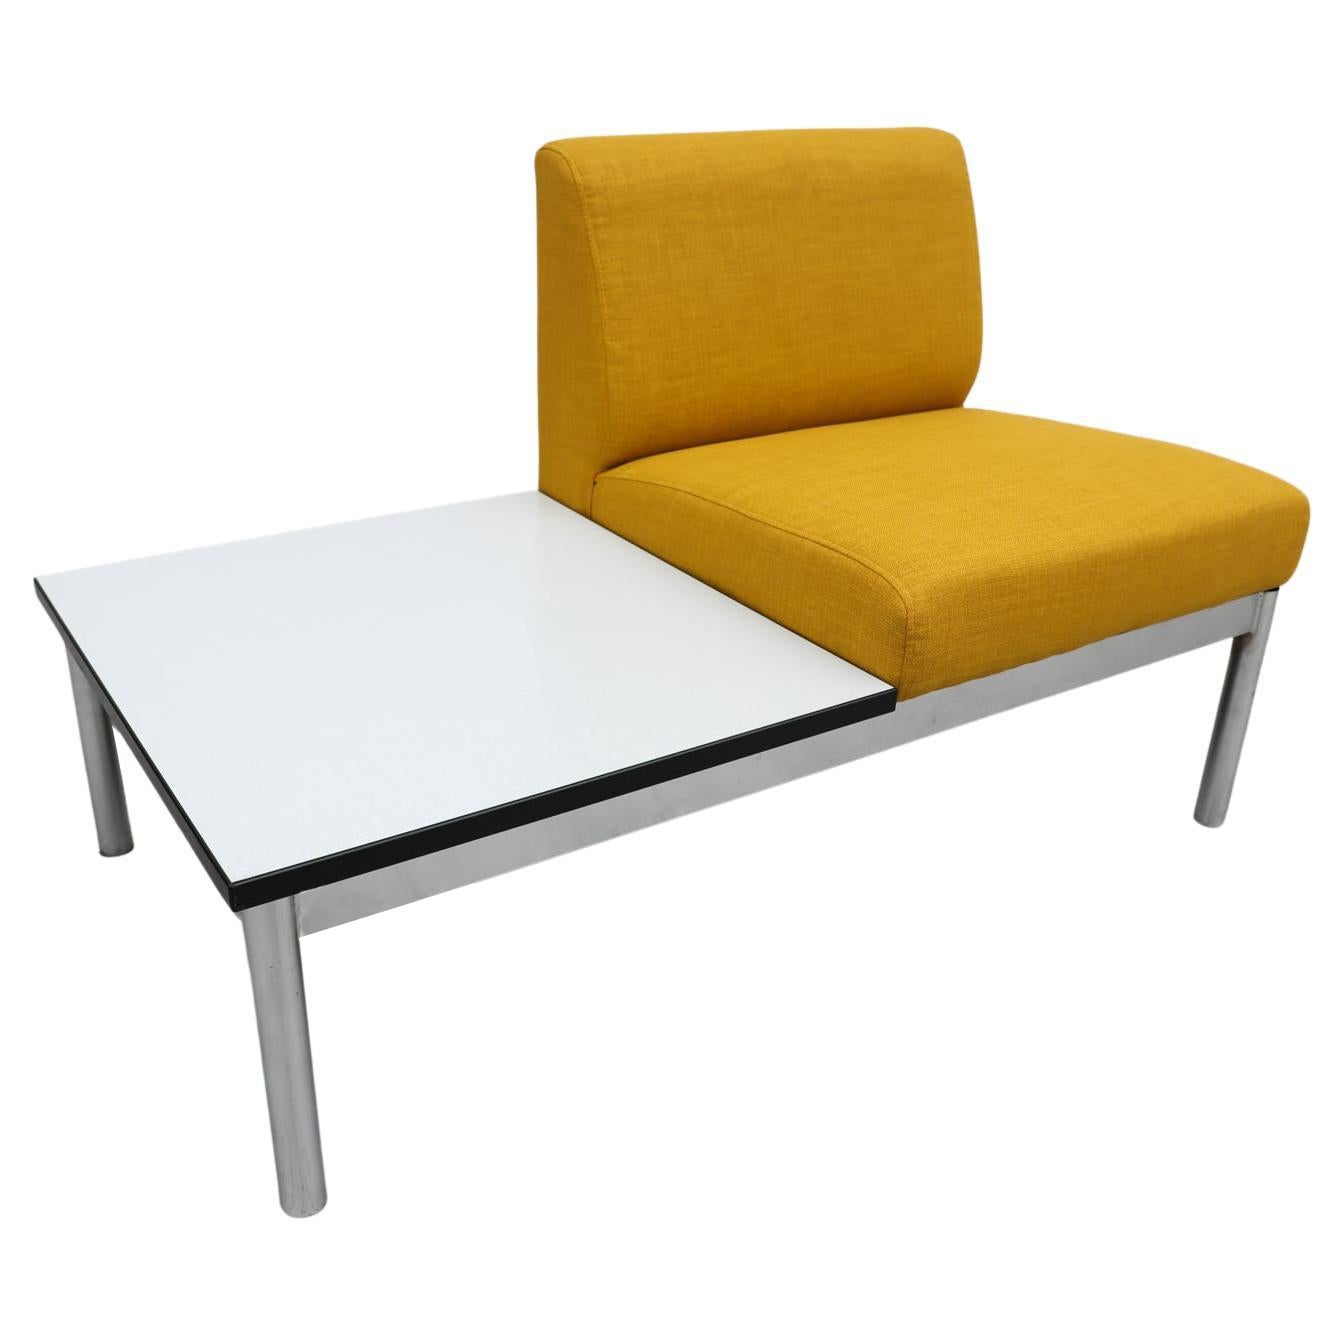 Mid-Century Kho Liang Ie Style Yellow Chair with Chrome Legs and Connected Table For Sale